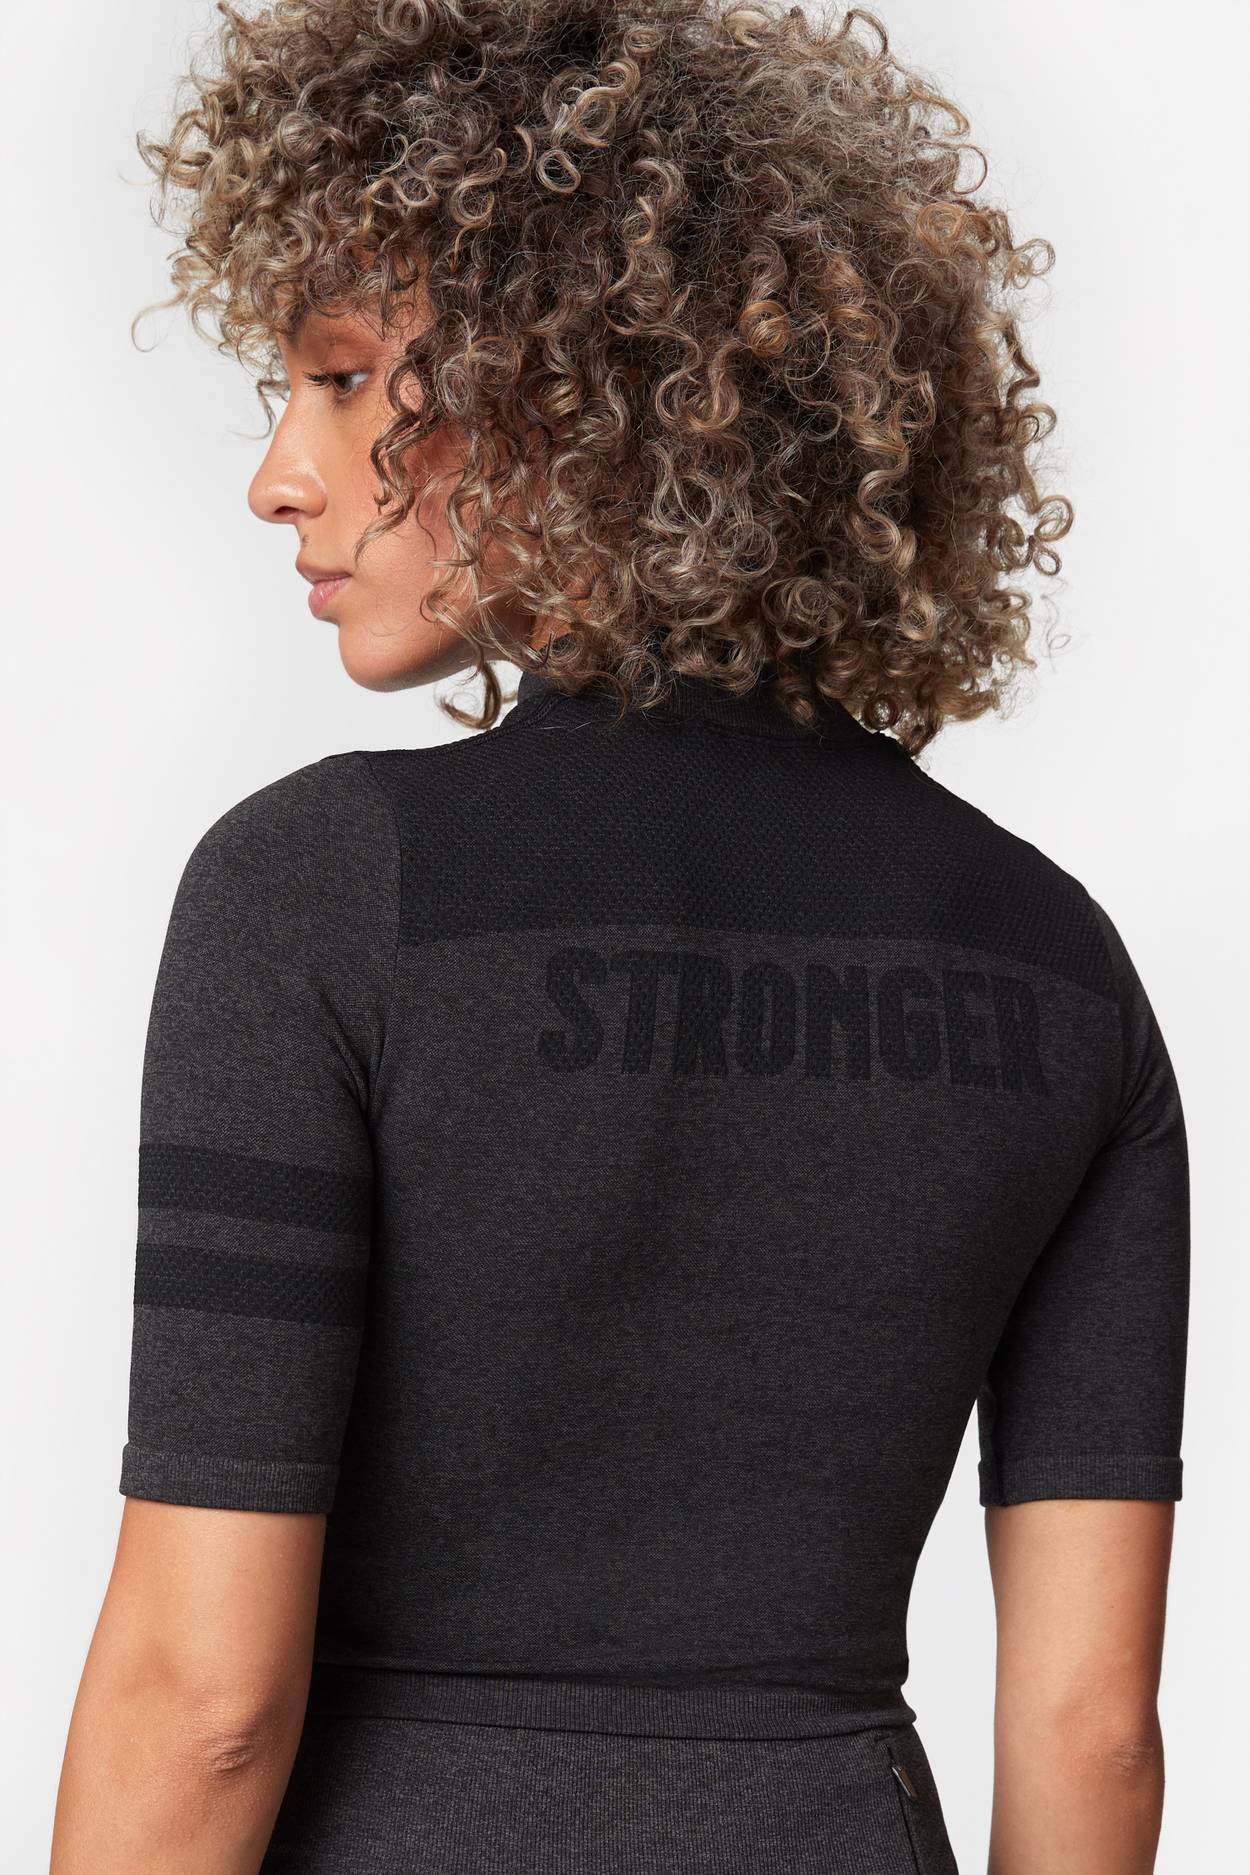 Buy Charge Online Seamless | I STRONGER Tee